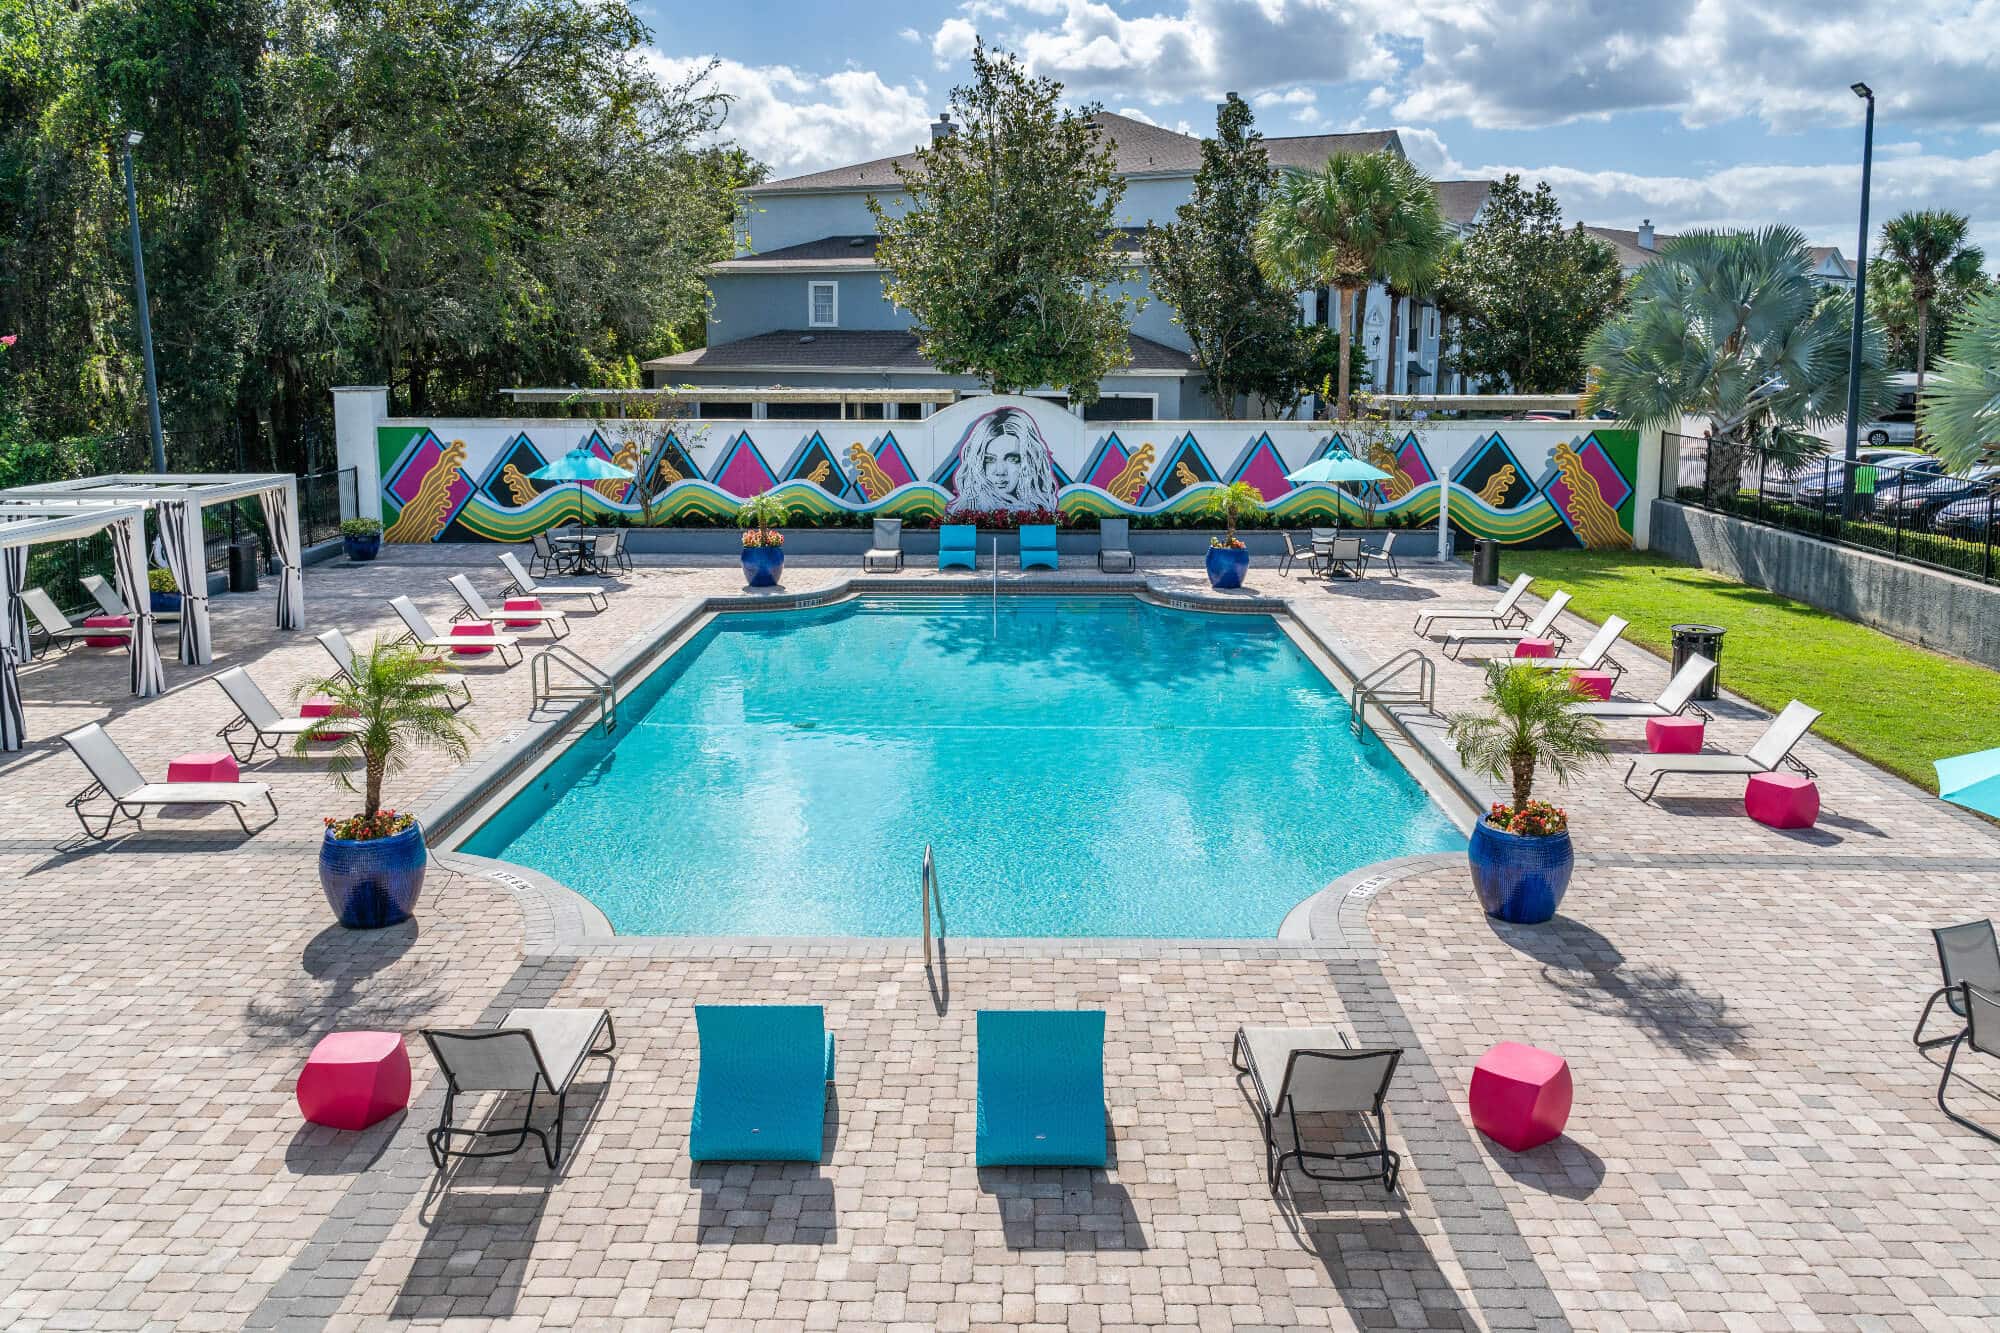 arden villas off campus apartments near the university of central florida ucf orlando resident clubhouse terrace view of resort style pool